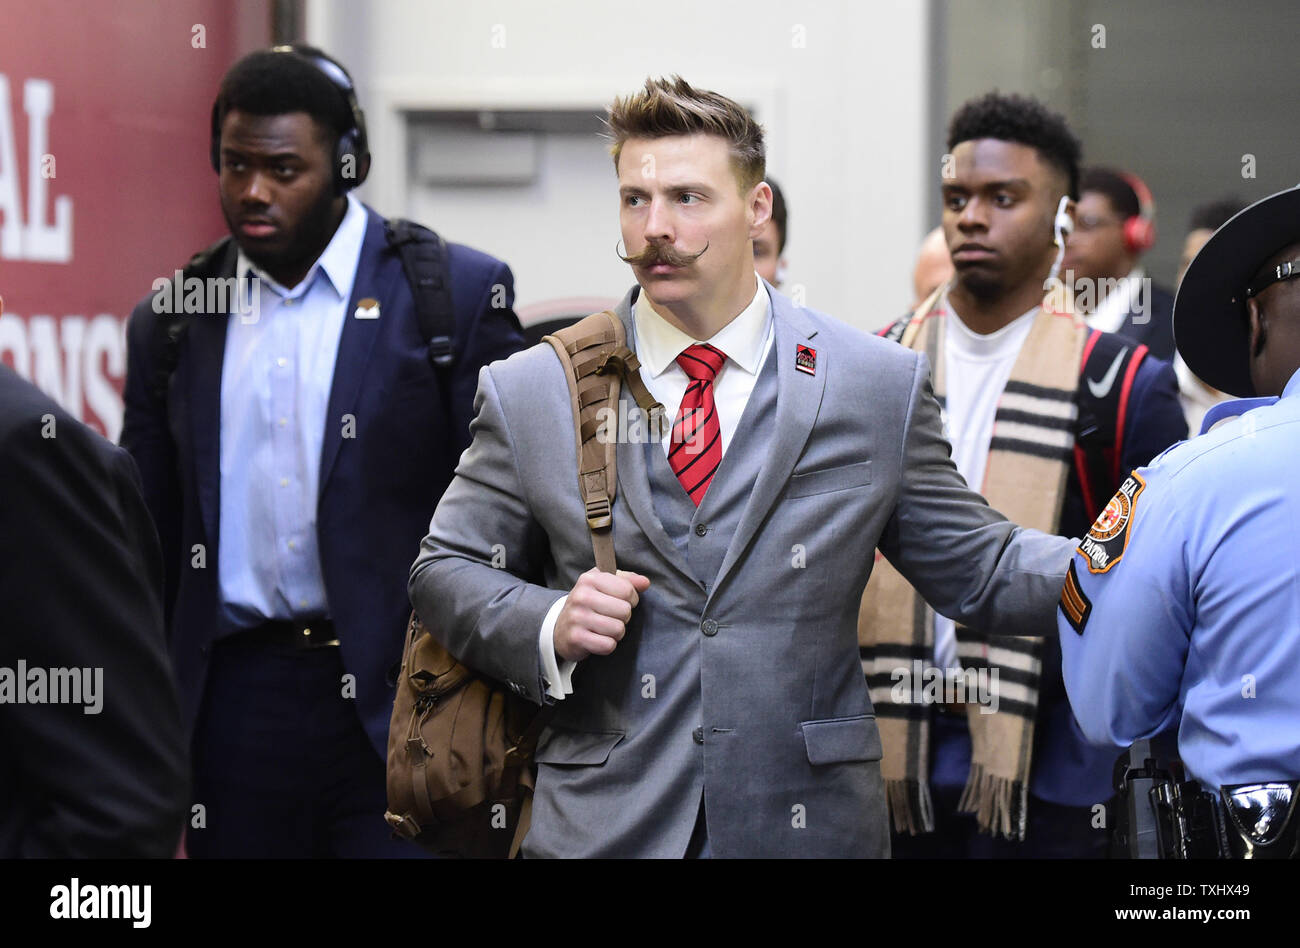 Georgia Bulldogs coach Aaron Feld (C) arrives for the NCAA College Football  Playoff National Championship against